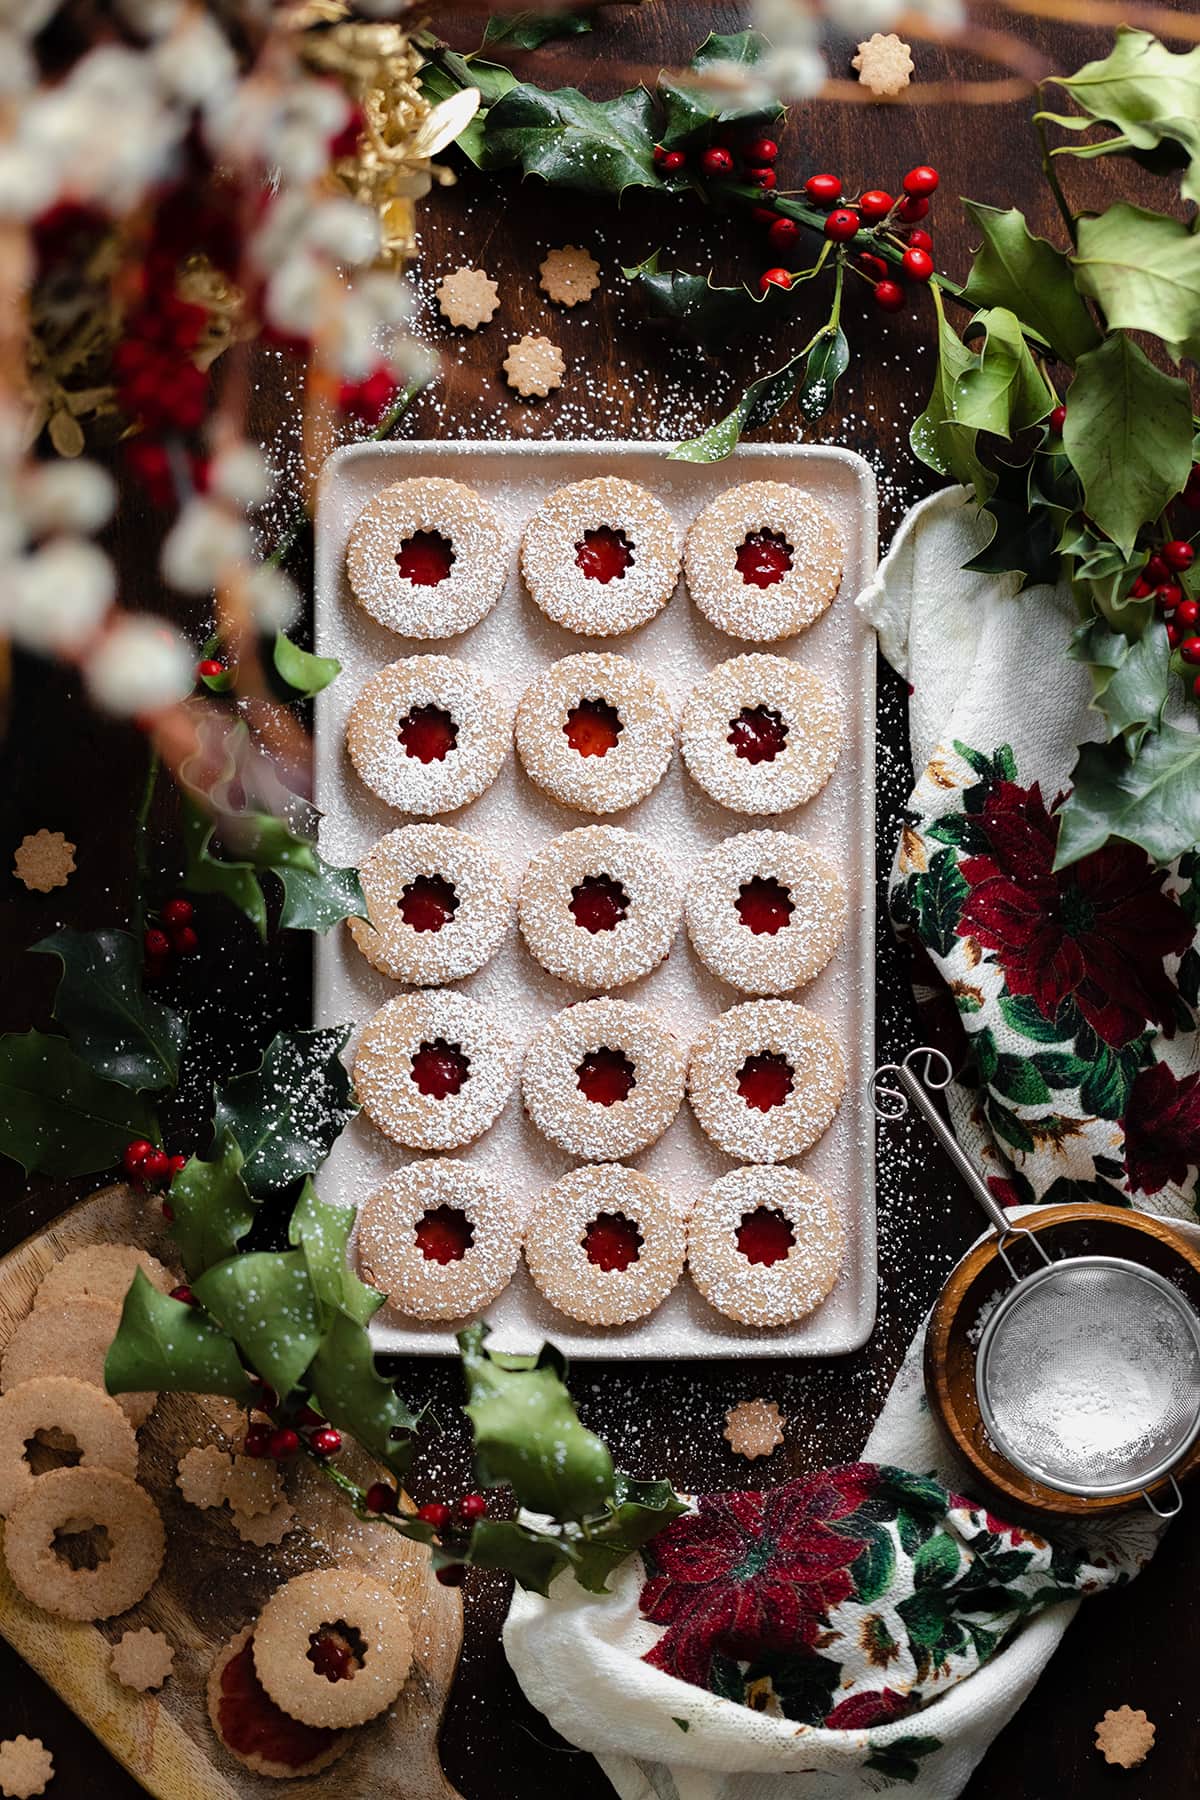 Gluten-Free Linzer Cookies with raspberry jam and a dusting of powdered sugar on a beige plate. Decorated with Christmas decorations all around the plate